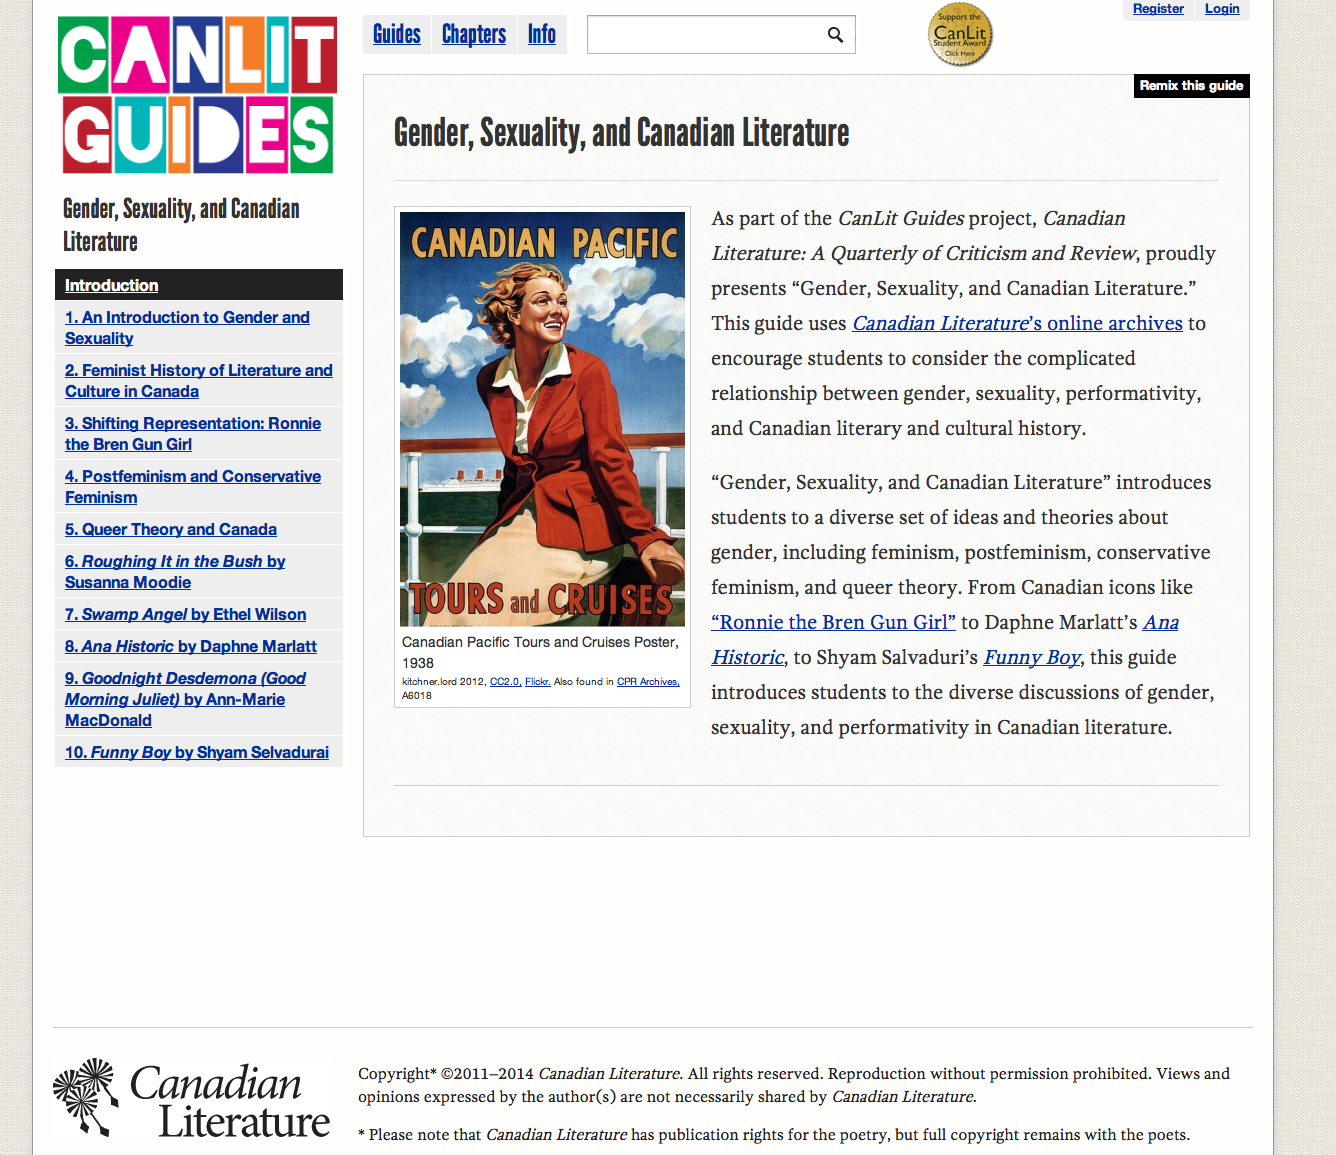 Screen capture of the opening page of the guide "Gender,
    Sexuality, and Canadian Literature" (http://canlitguides.ca/guides/gender).